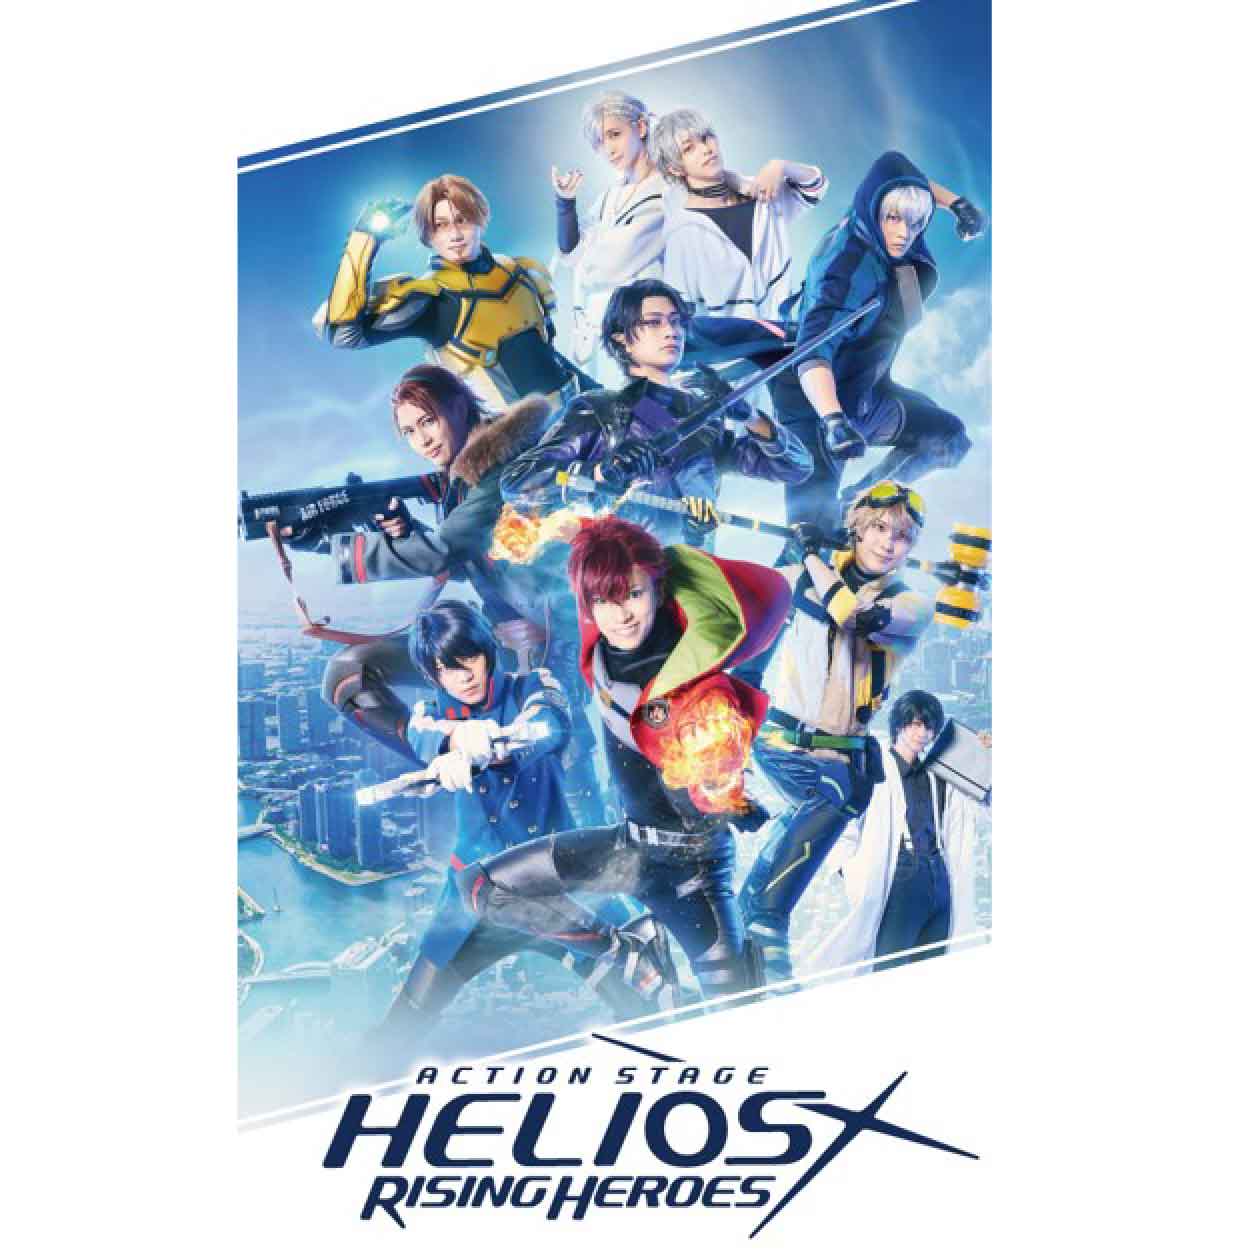 ACTION STAGE HELIOS RISING HEROES / ライブパート楽曲